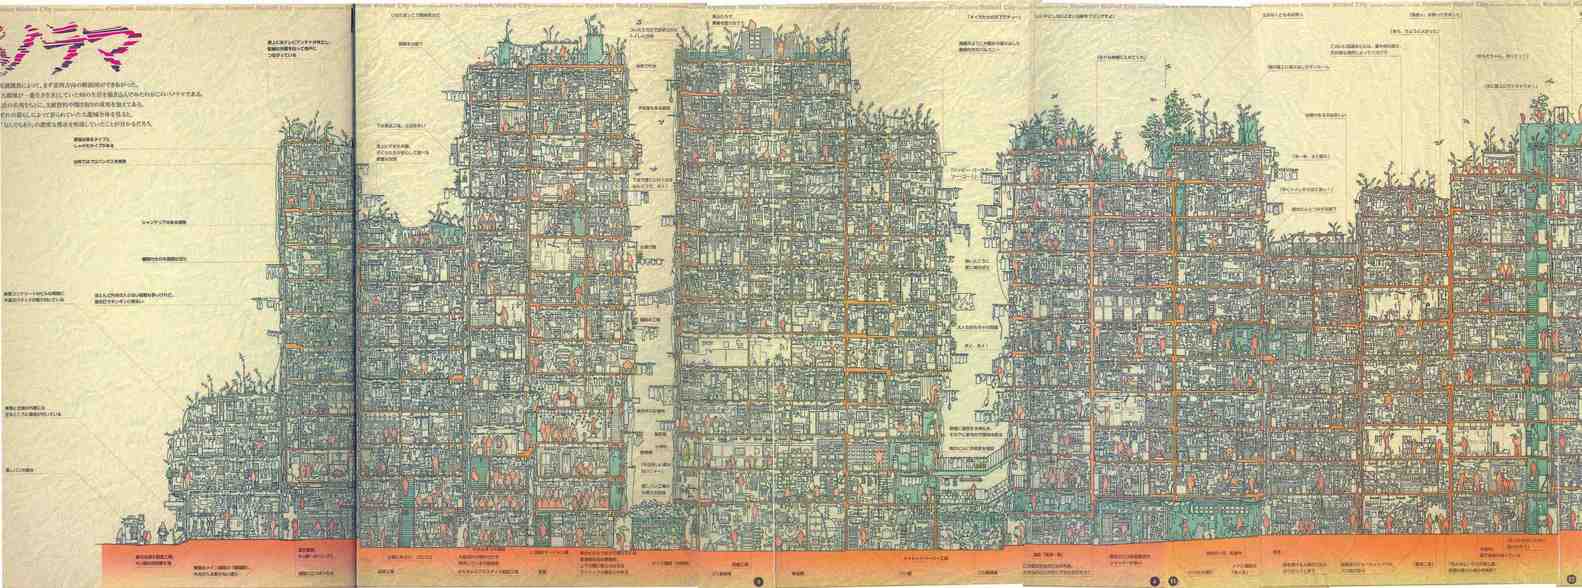 Kowloon Walled City - vue en coupe